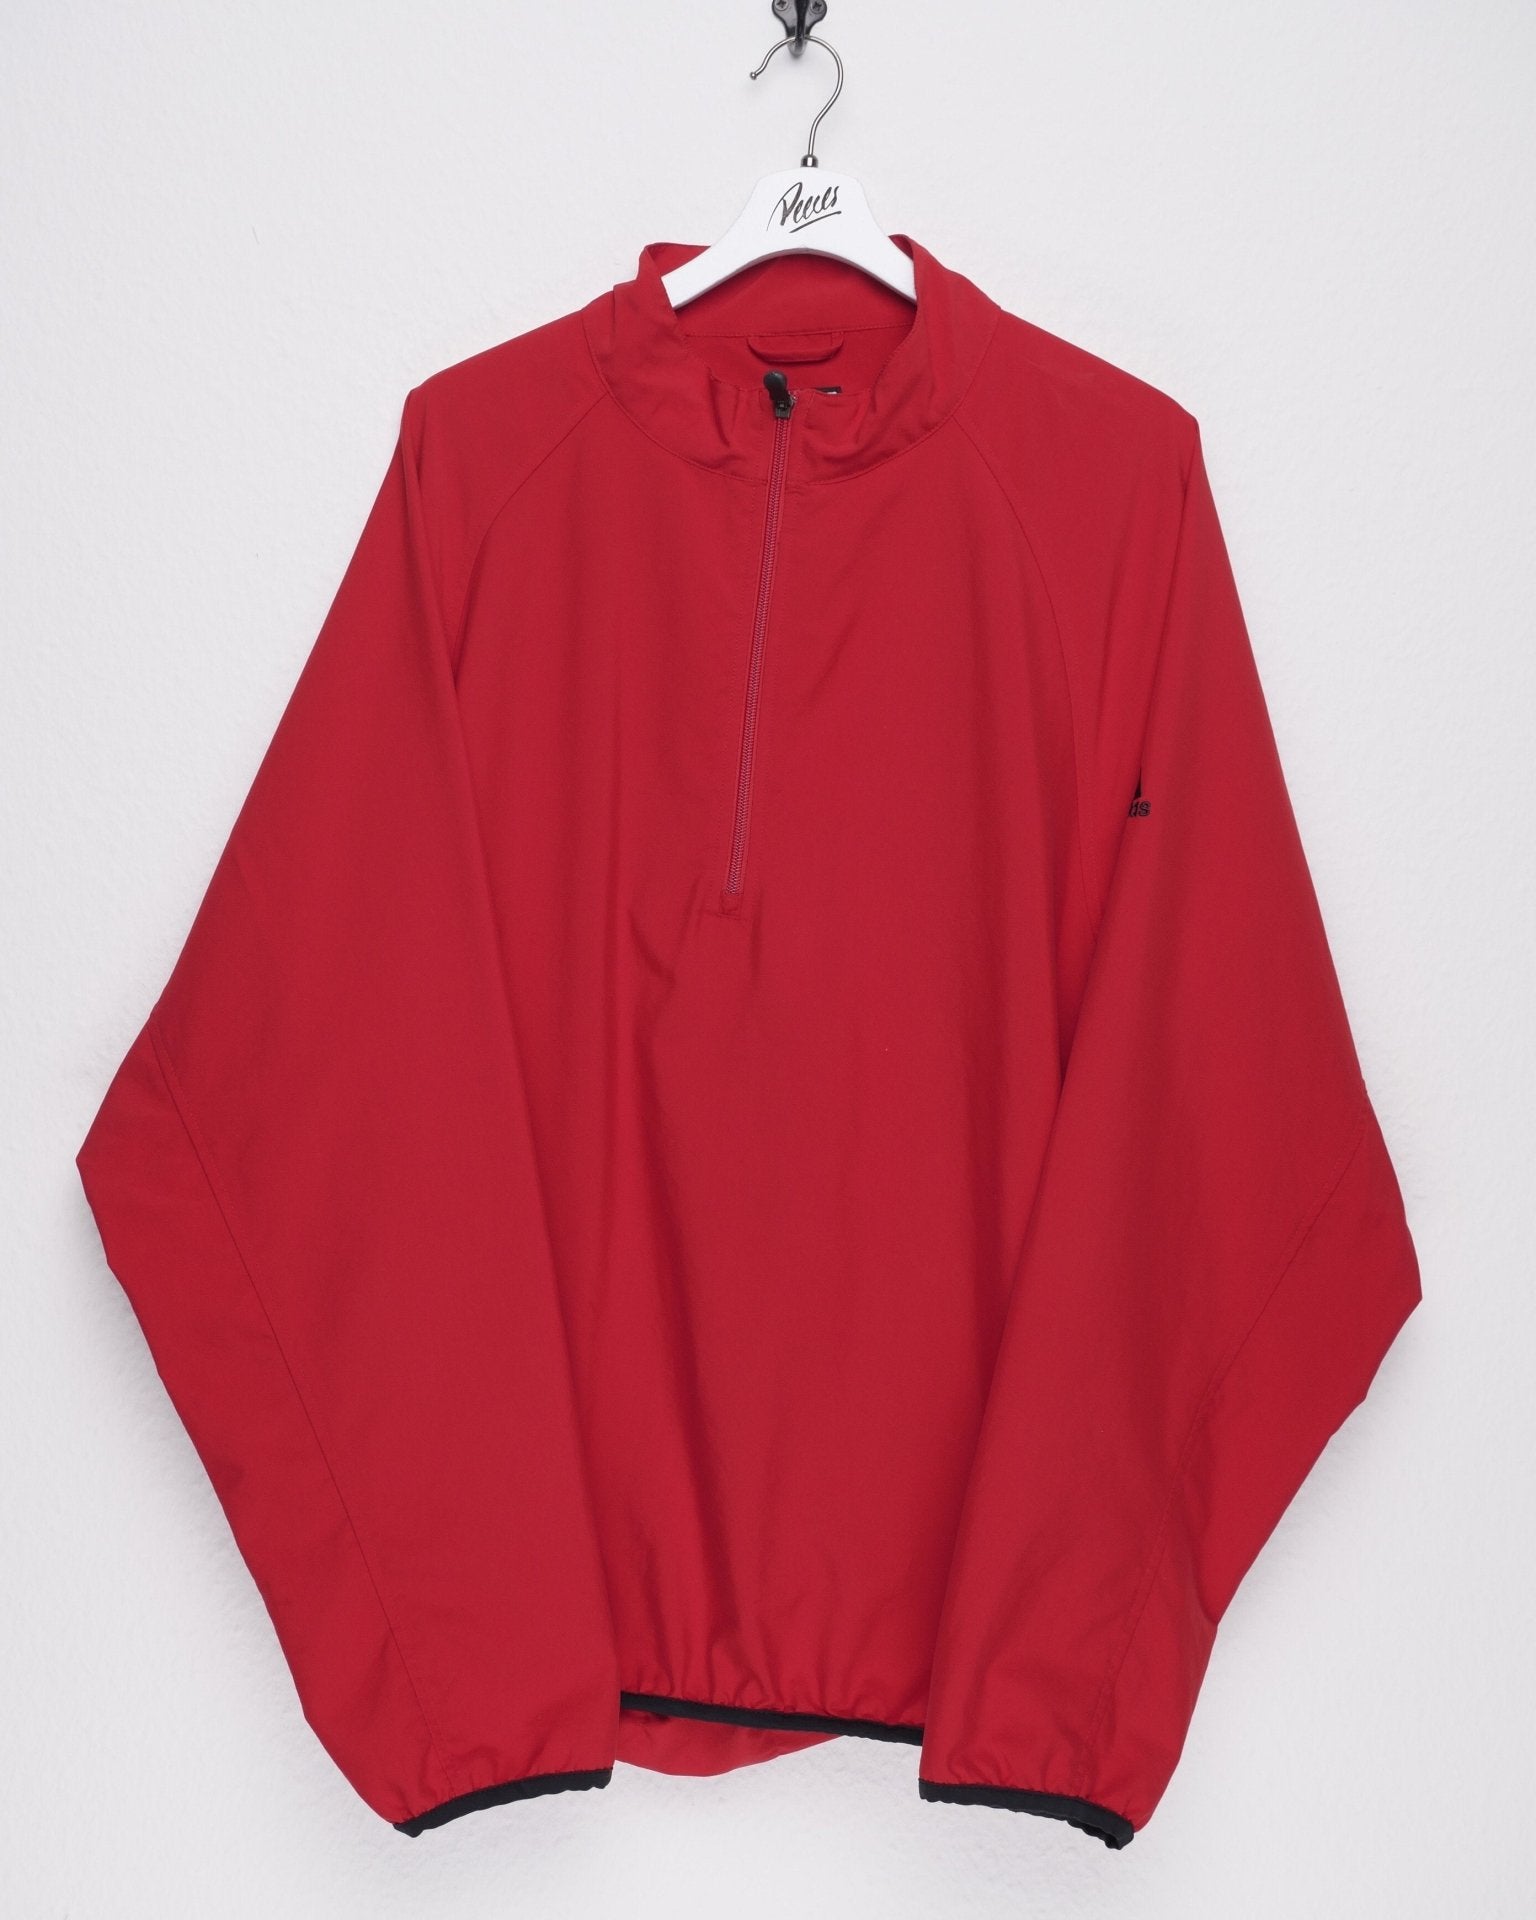 adidas embroidered Logo red Half Zip Jersey Sweater - Peeces